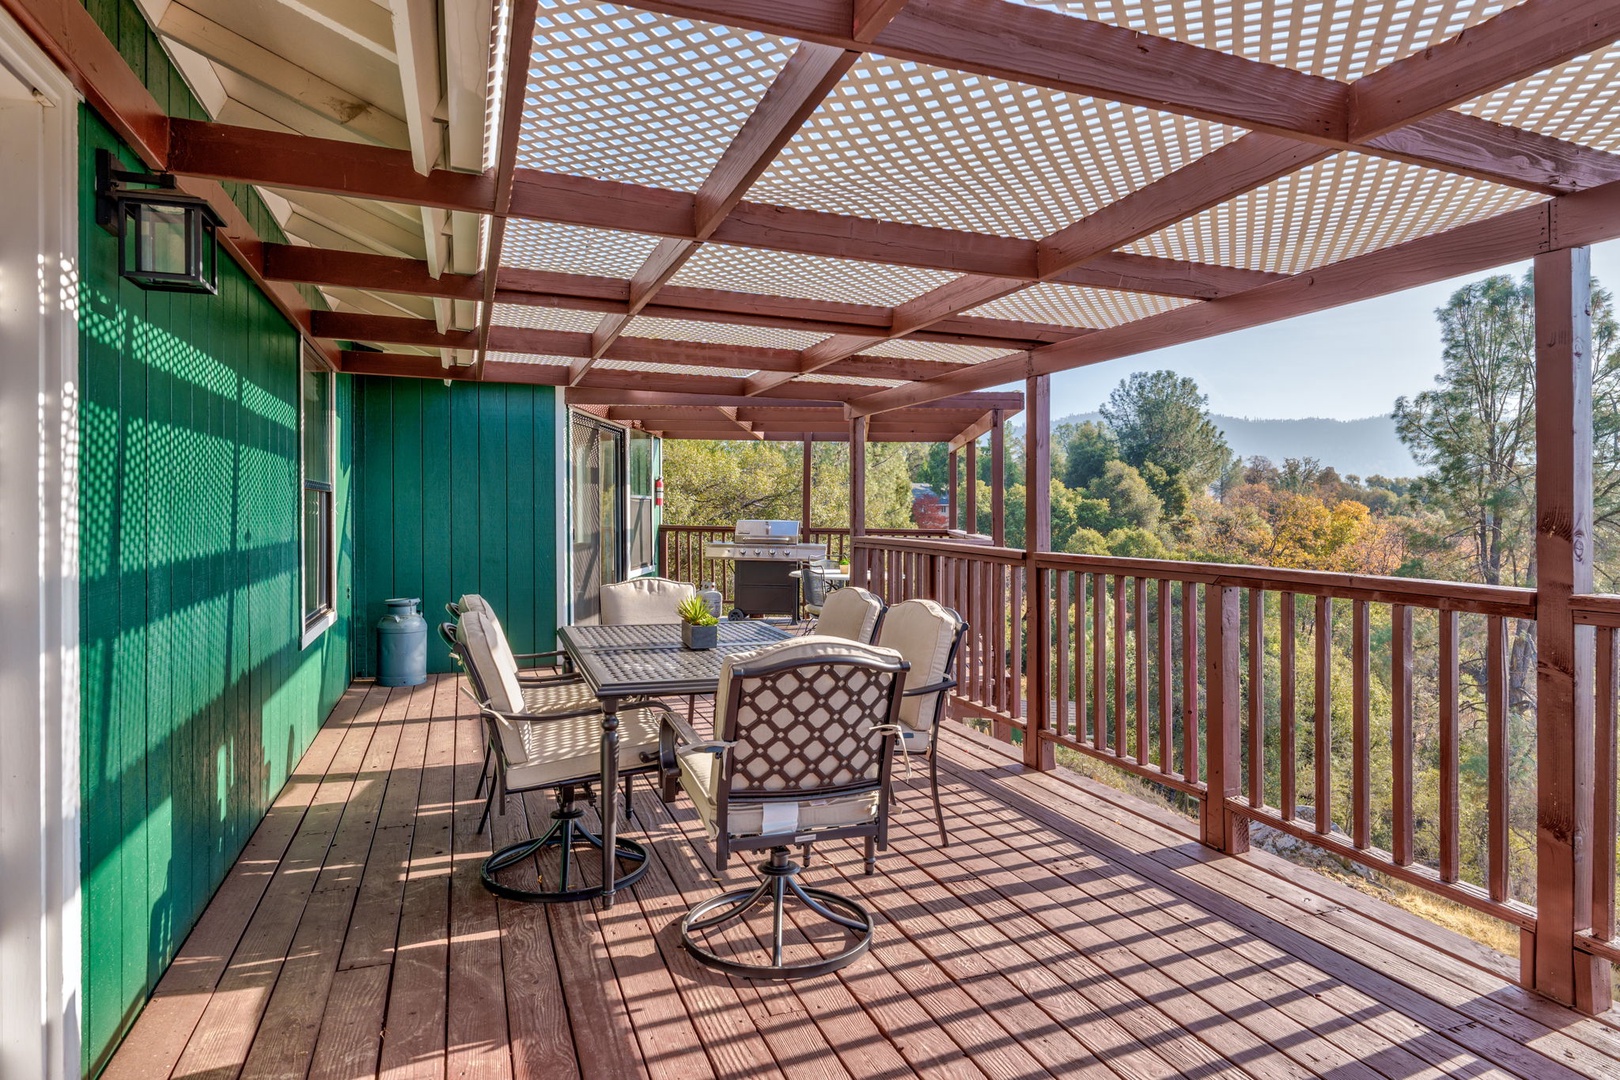 Outdoor grilling and dining will be a breeze on the Back Deck